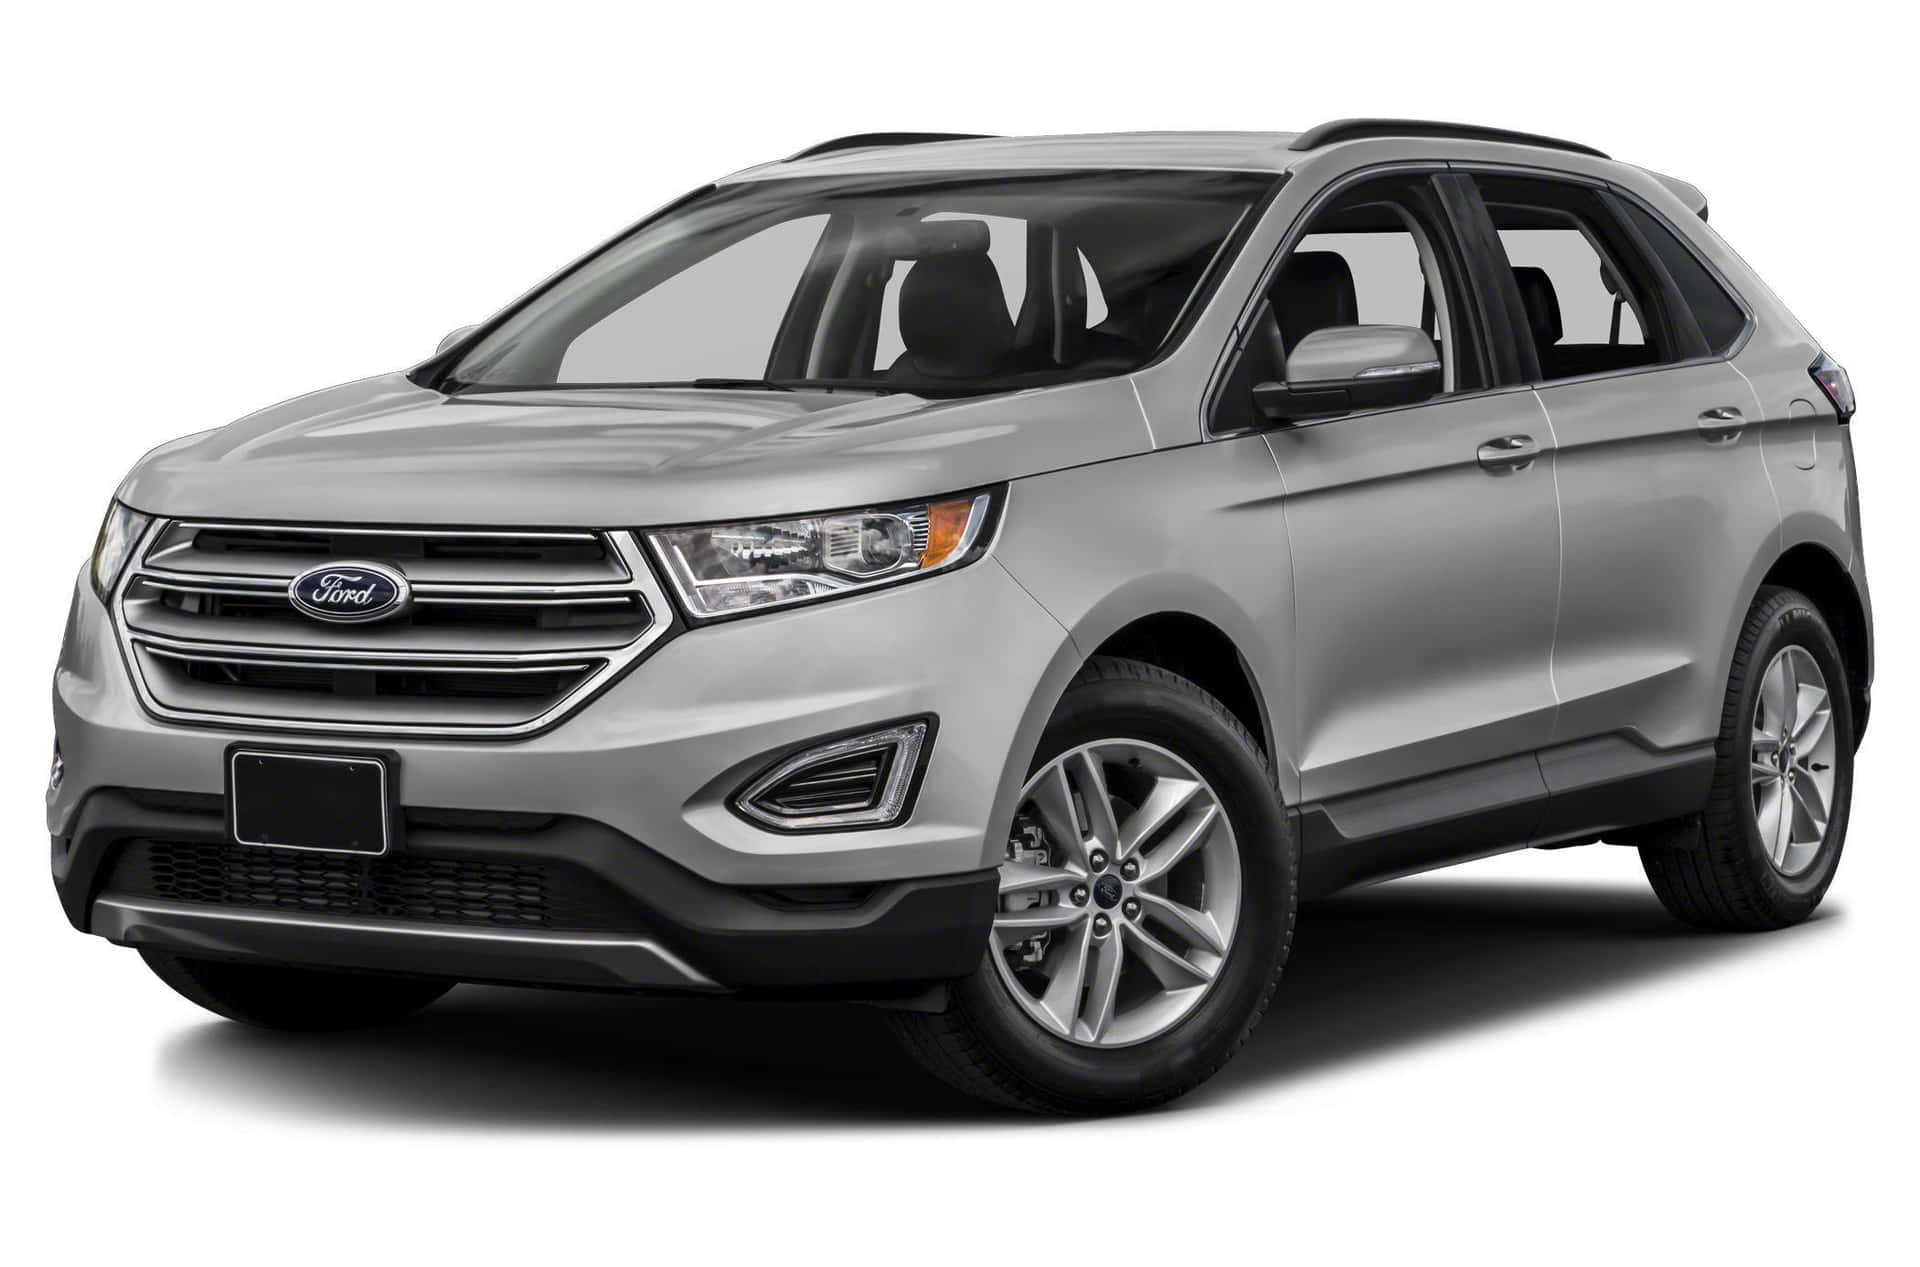 Sleek and Stylish Ford Edge on the Road Wallpaper